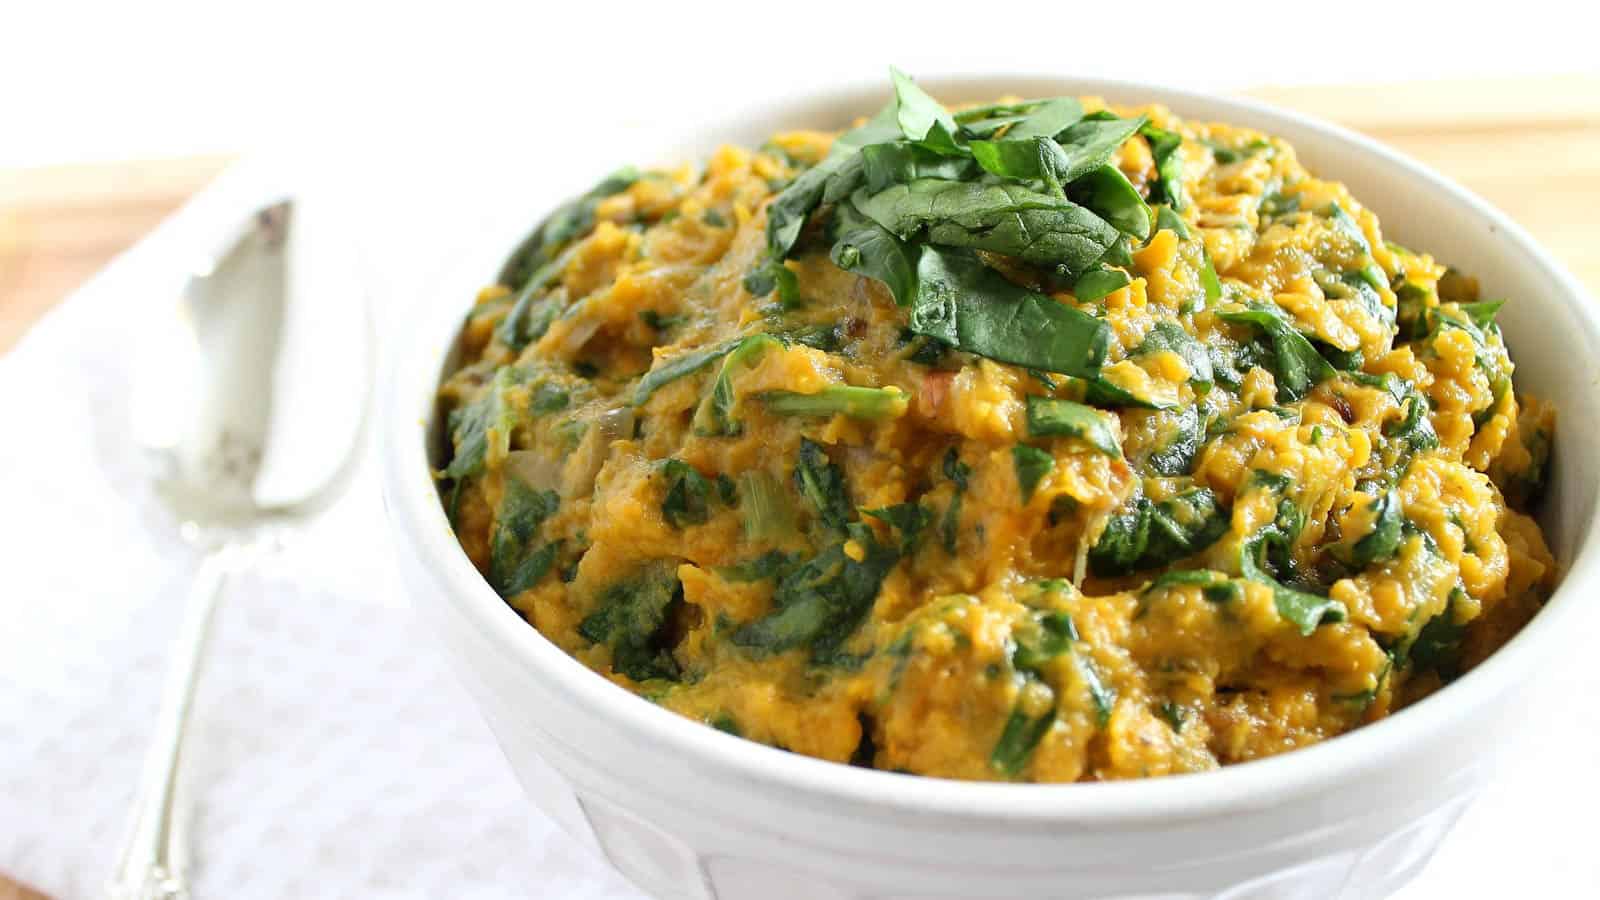 Mashed sweet potatoes with spinach and goat cheese in a white bowl.